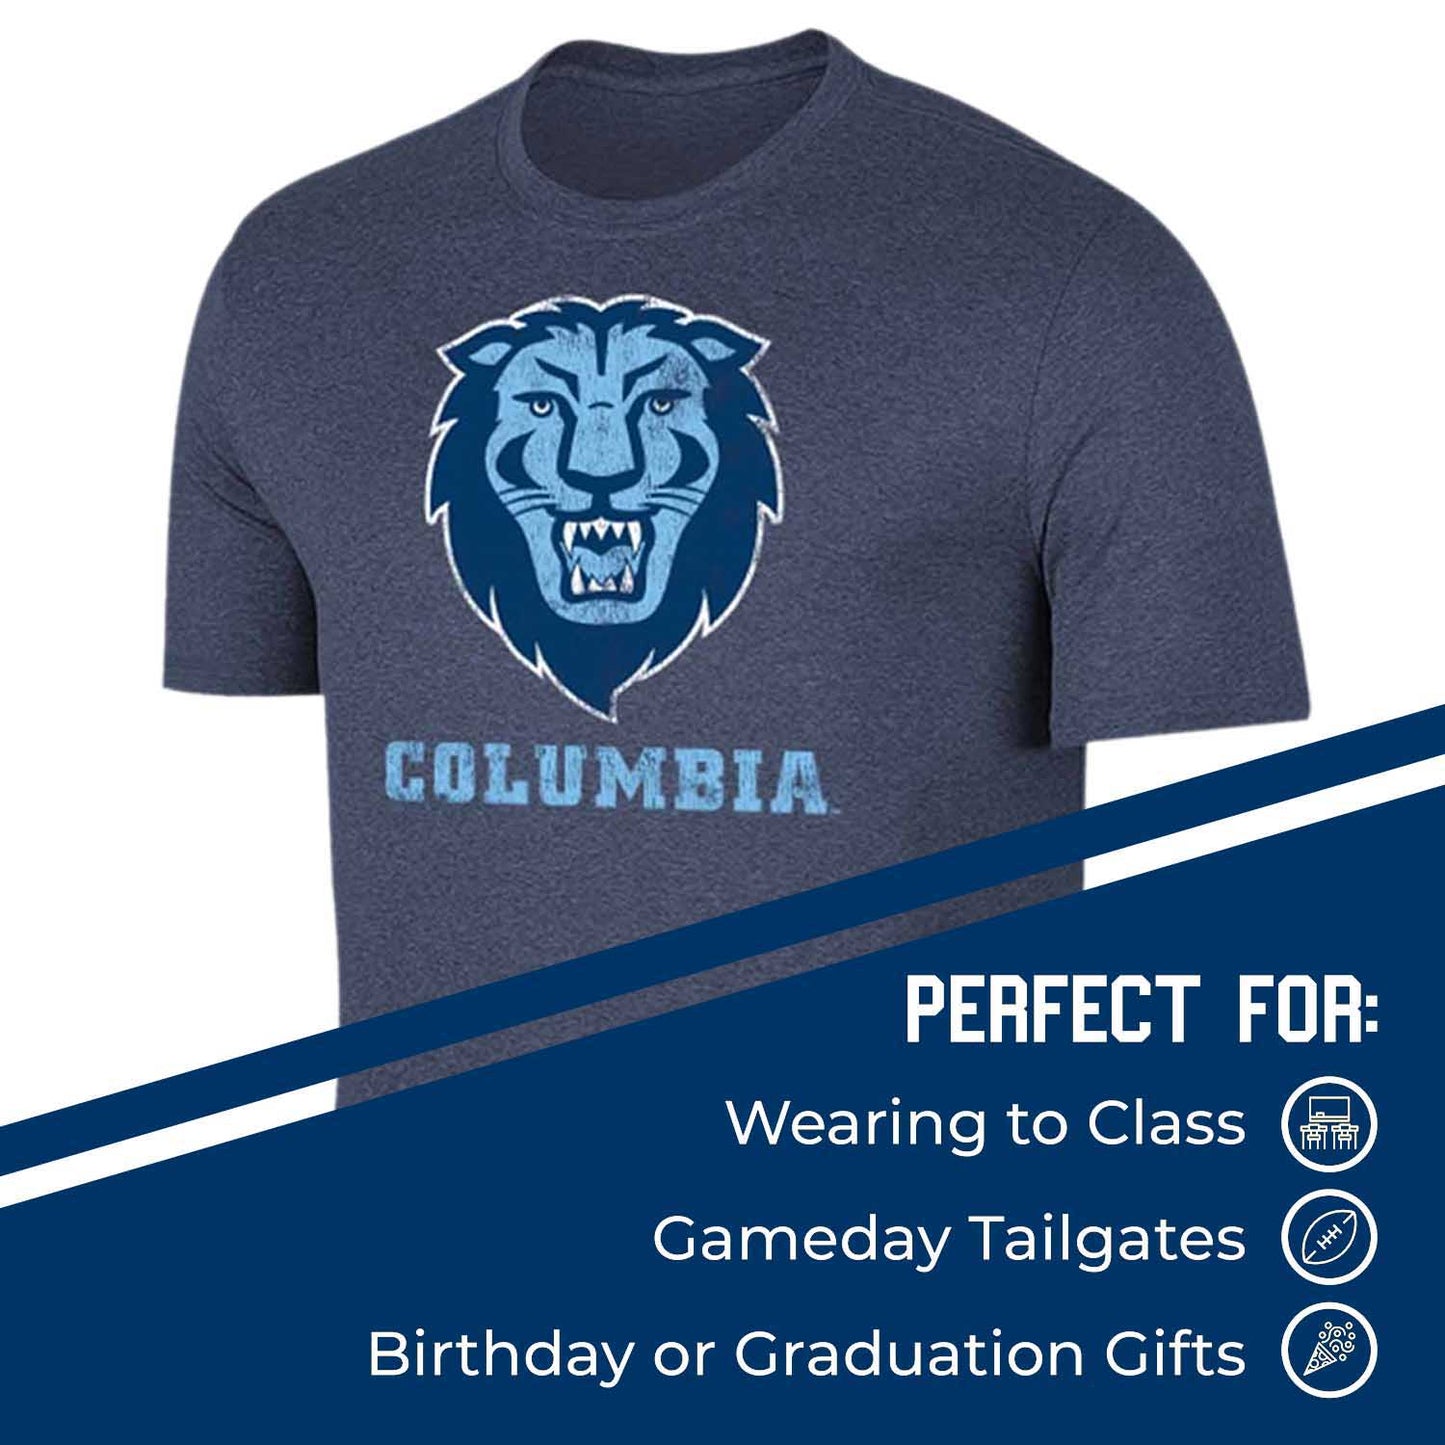 Columbia Lions Collegiate Adult Heathered Cotton Blend T-Shirt - Navy